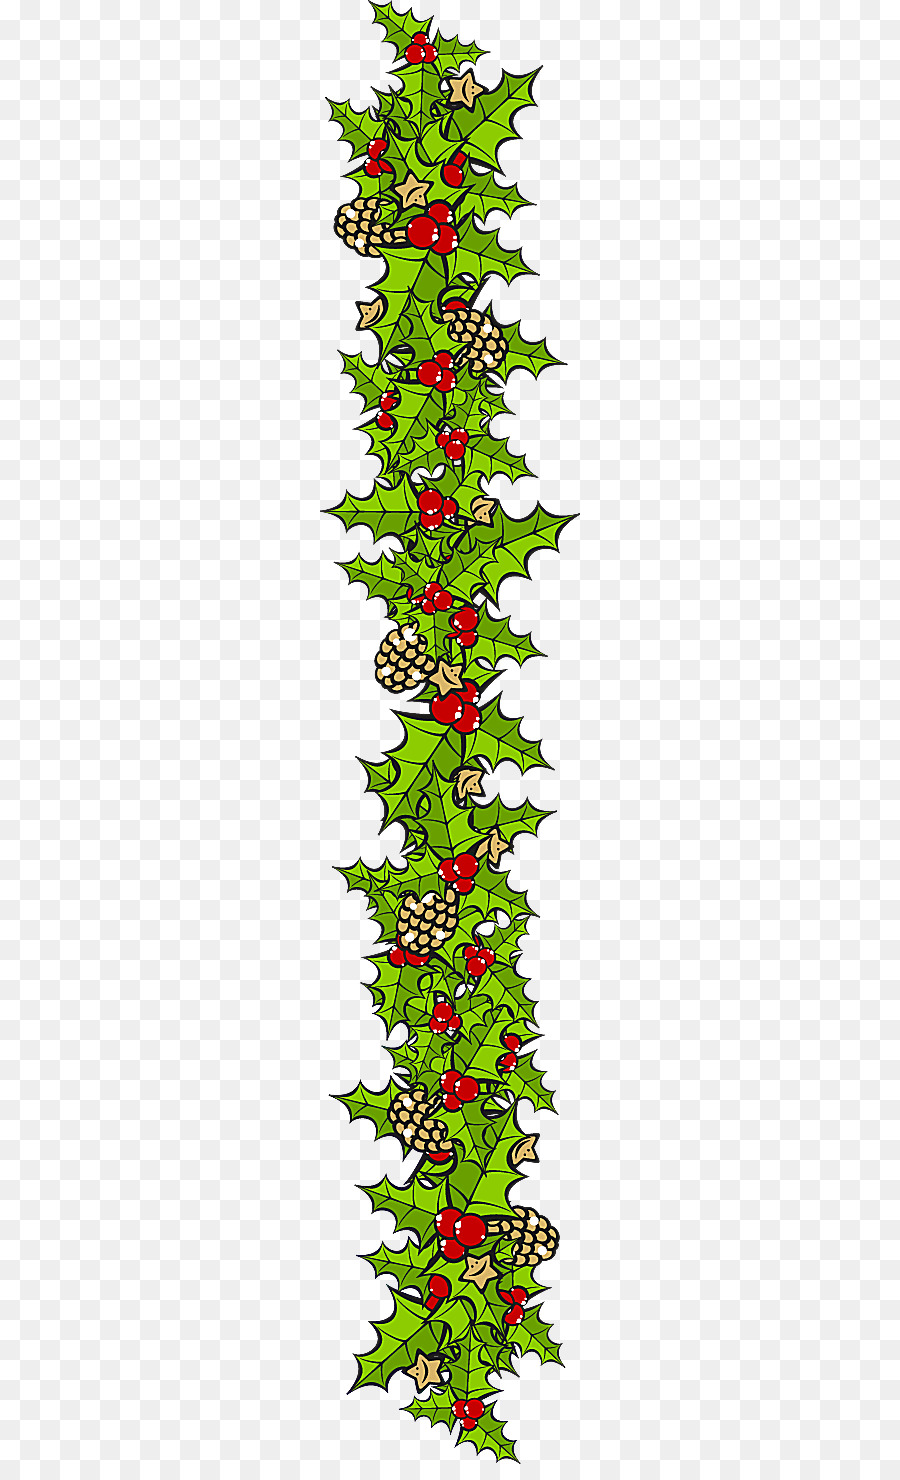 Borders Clip Art Portable Network Graphics Image - candy cane stripe border png download - 260*1464 - Free Transparent Borders Clip Art png Download.